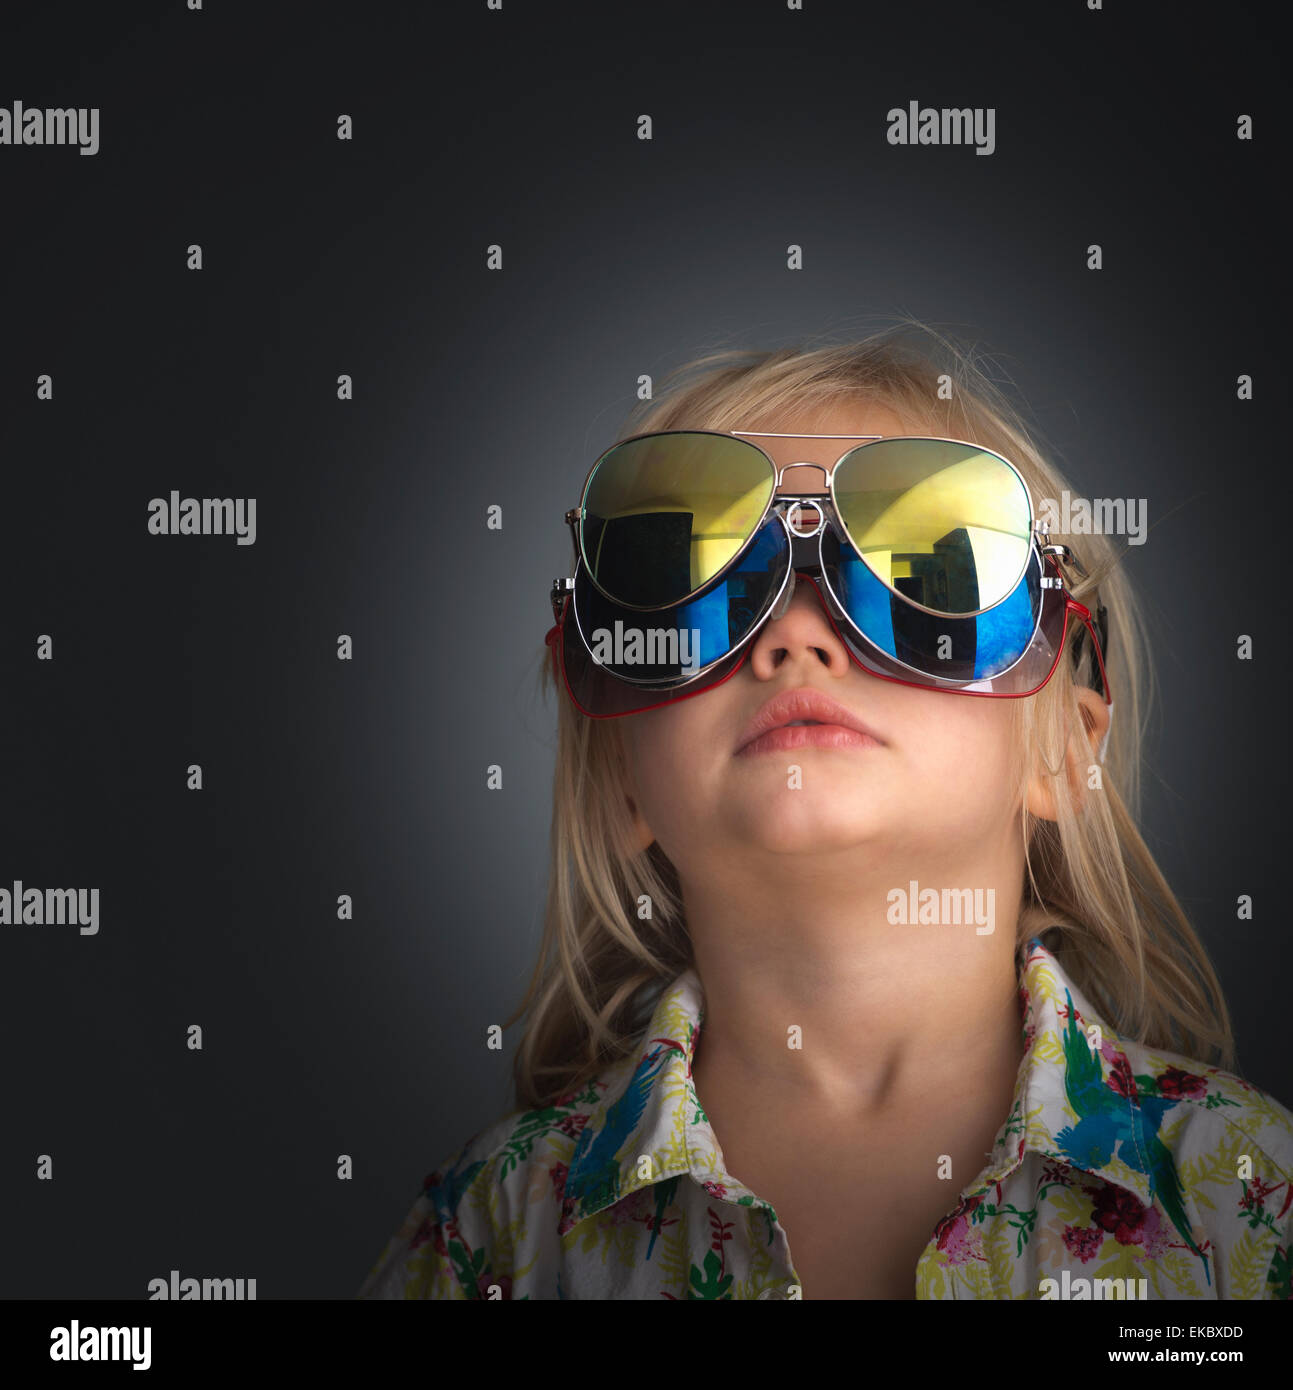 Portrait of young boy wearing 3 pairs of sunglasses Stock Photo